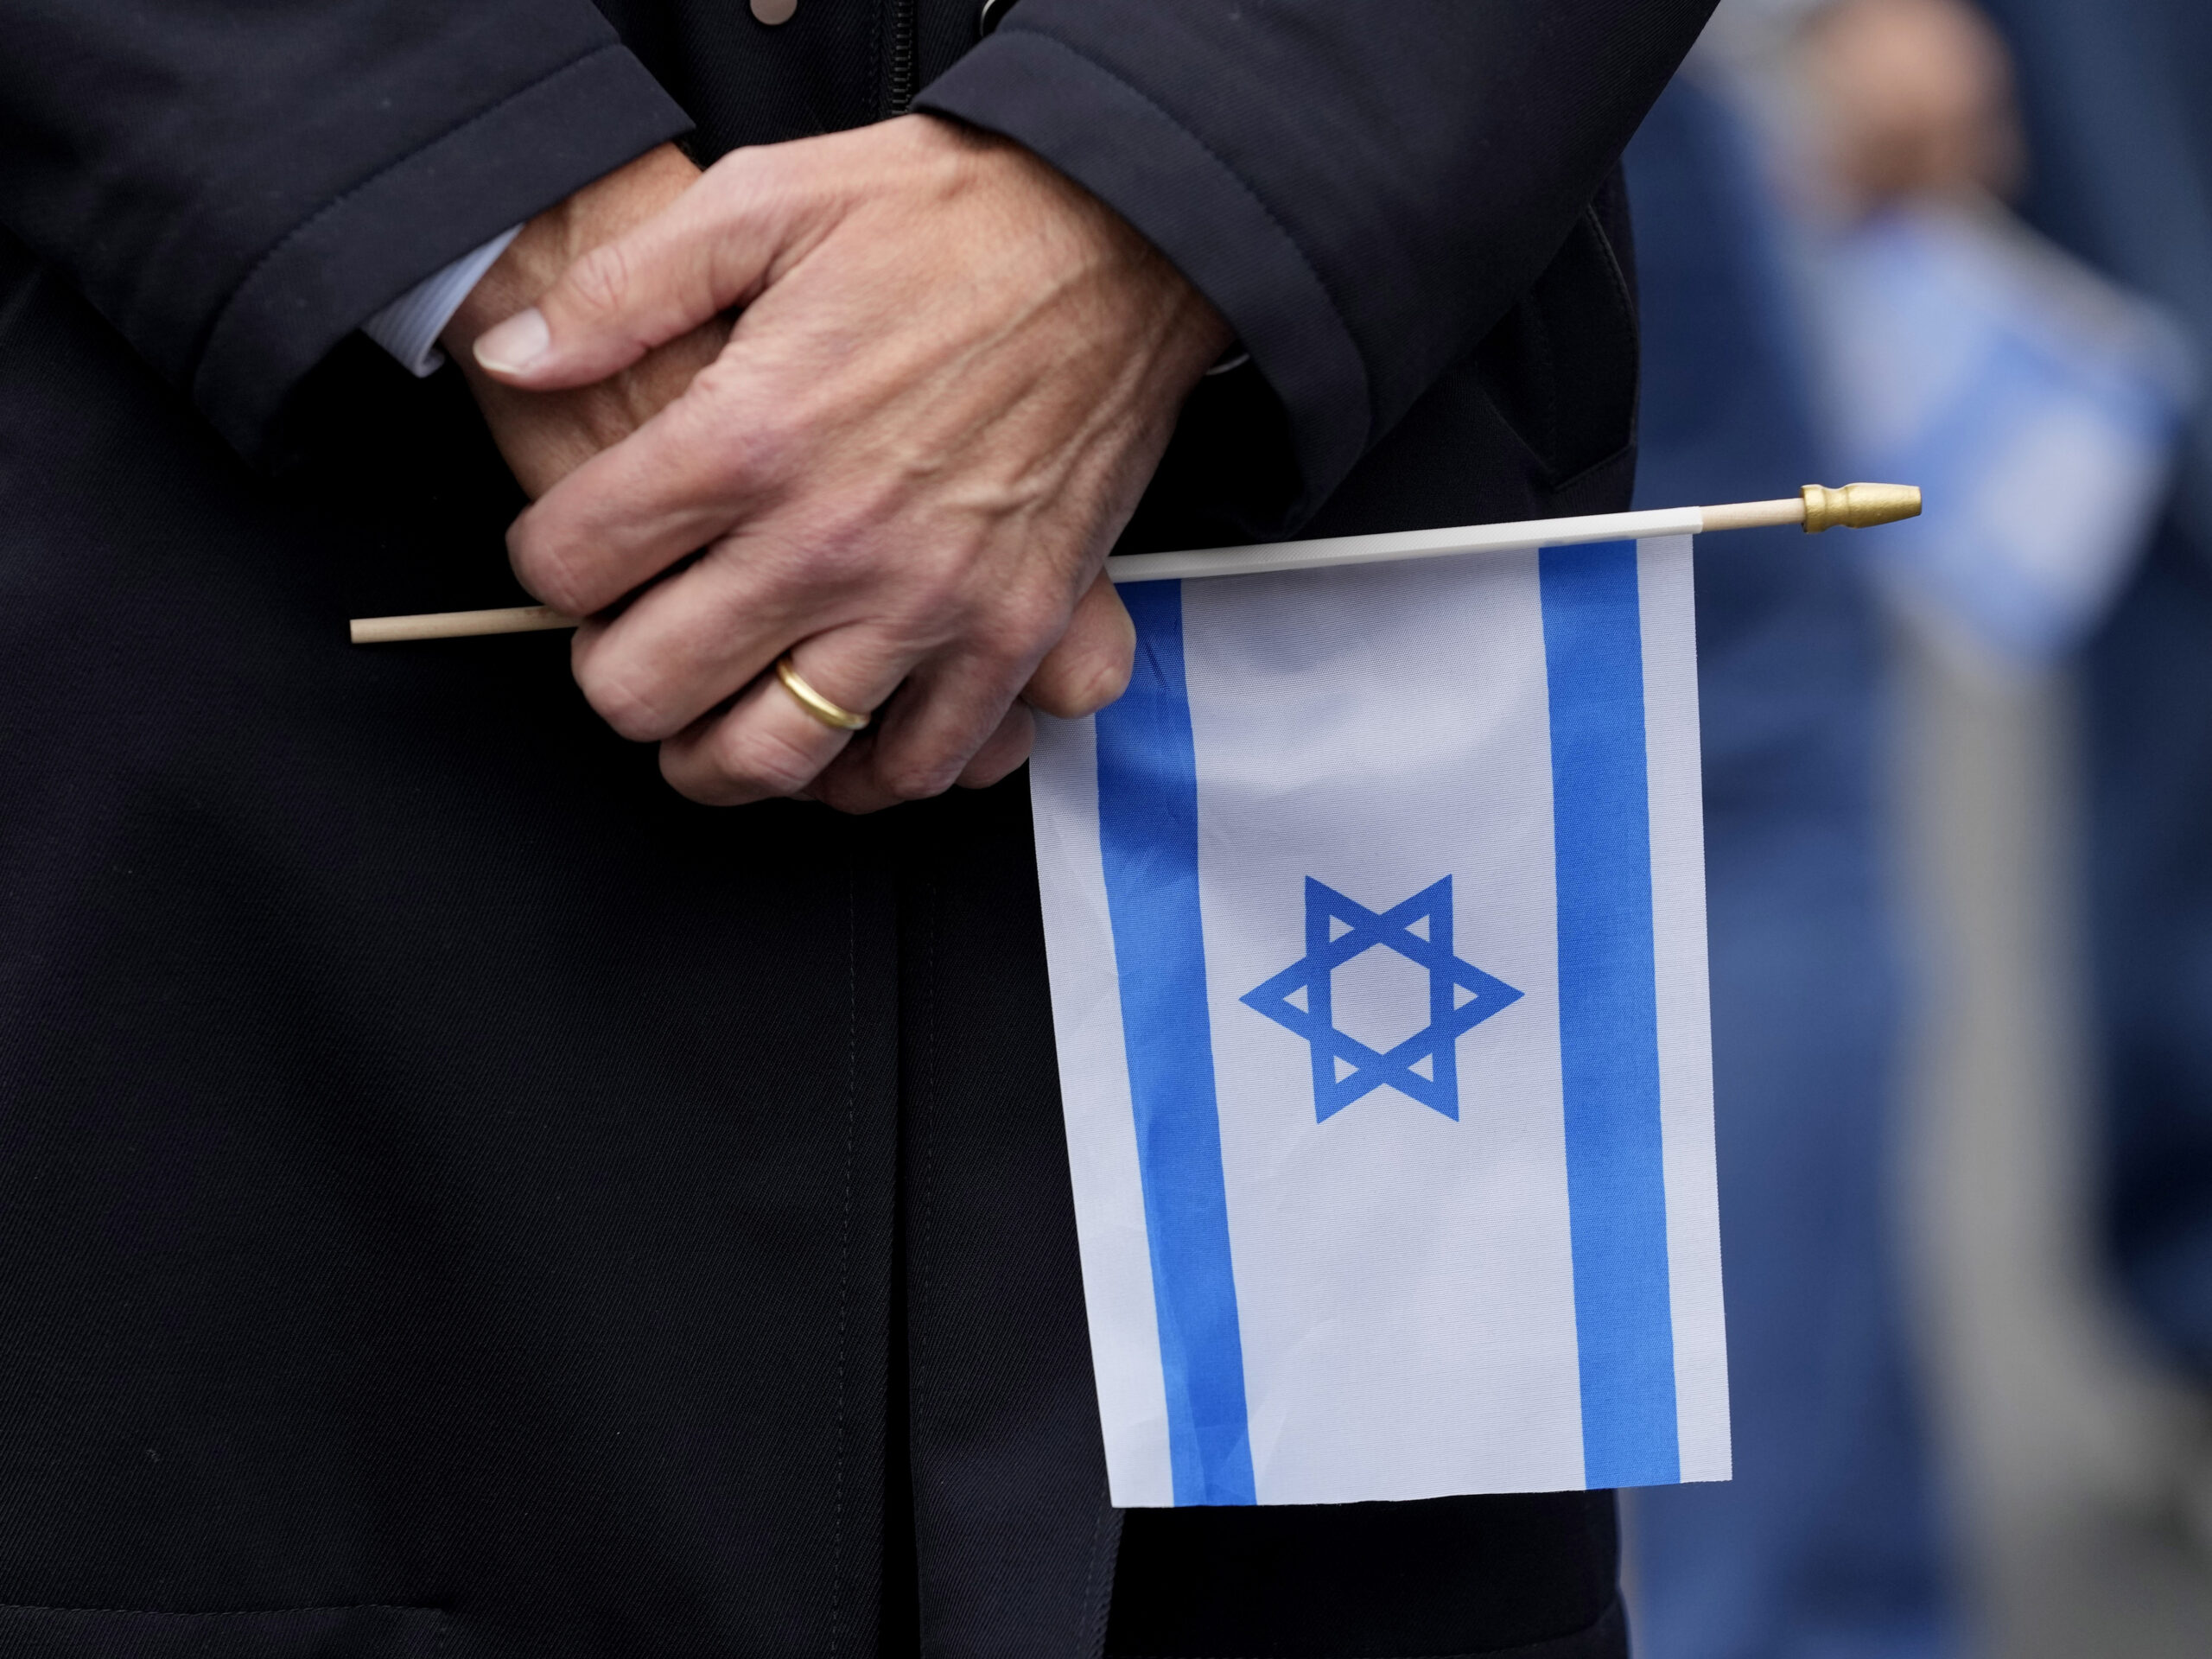 American Jewish Committee issued a report earlier this year that found that 94% of Jews and 74% of all U.S. adults say antisemitism is a very serious or somewhat serious problem.